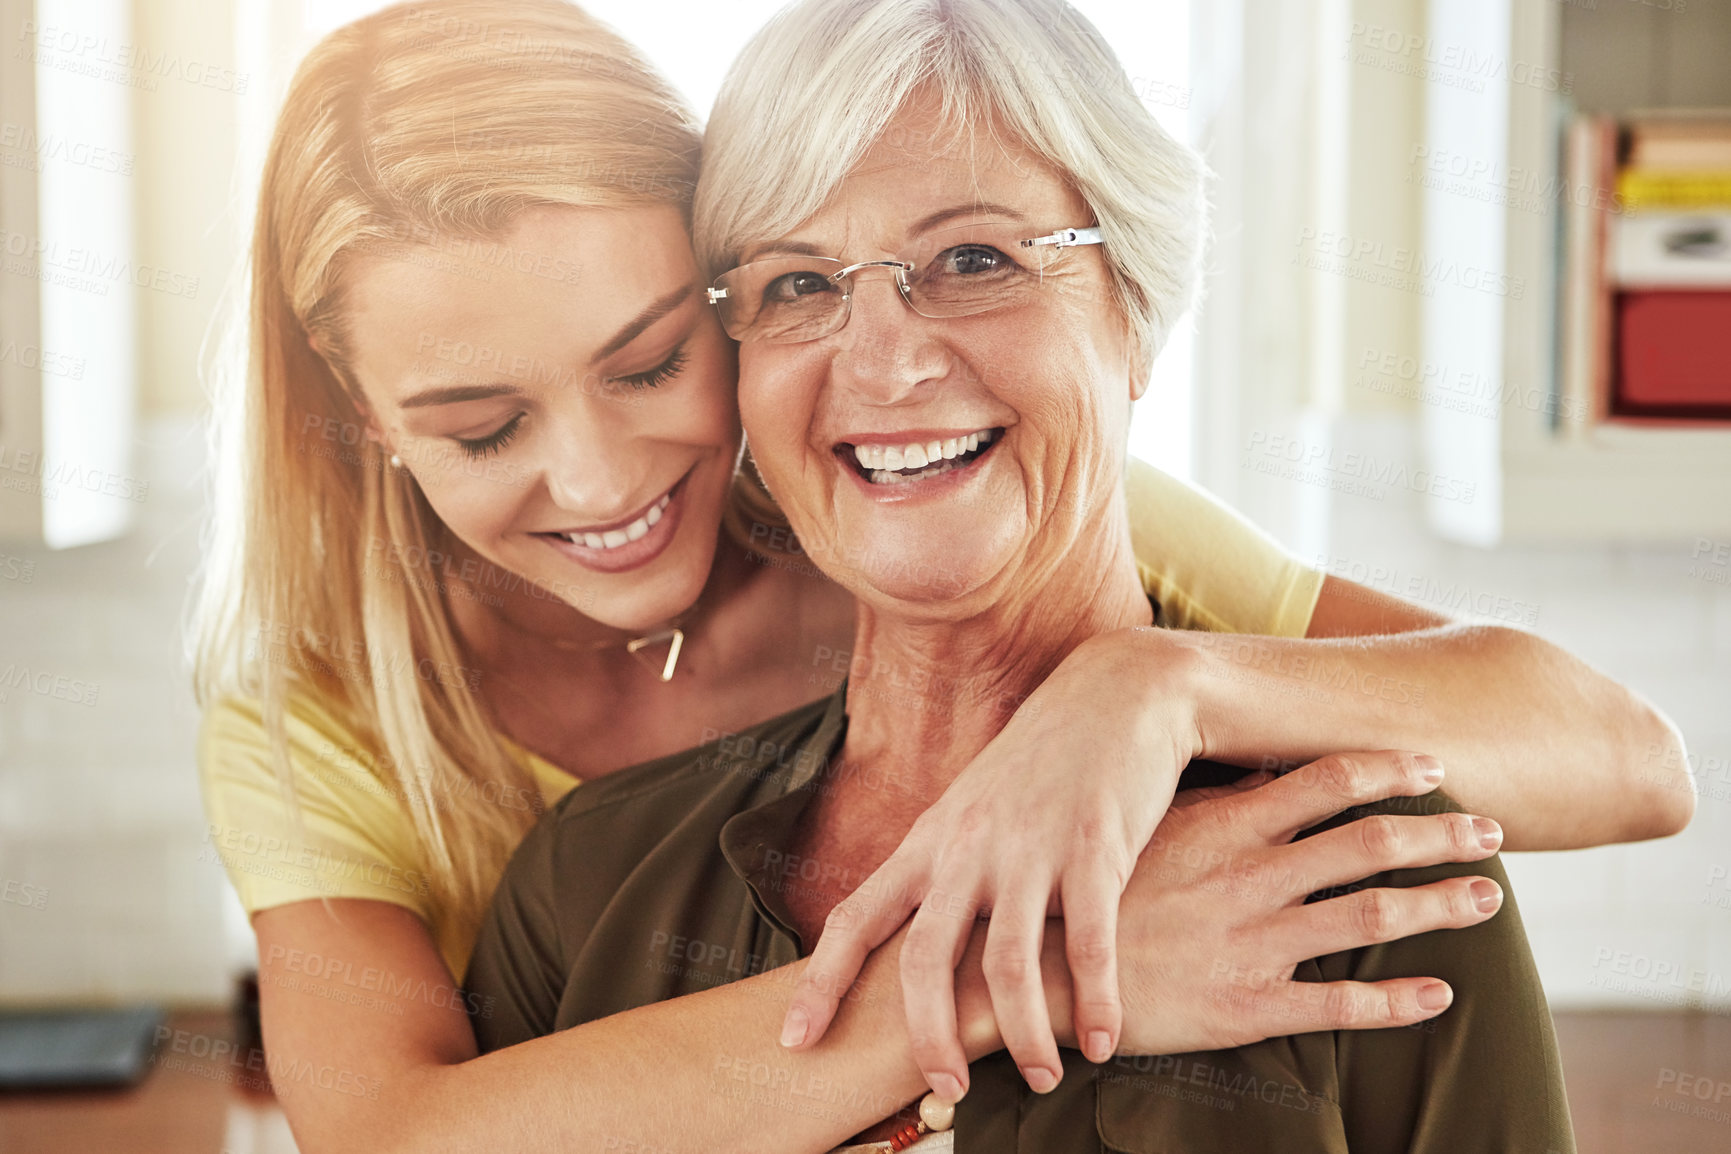 Buy stock photo Cropped shot of a senior woman and her adult daughter at home